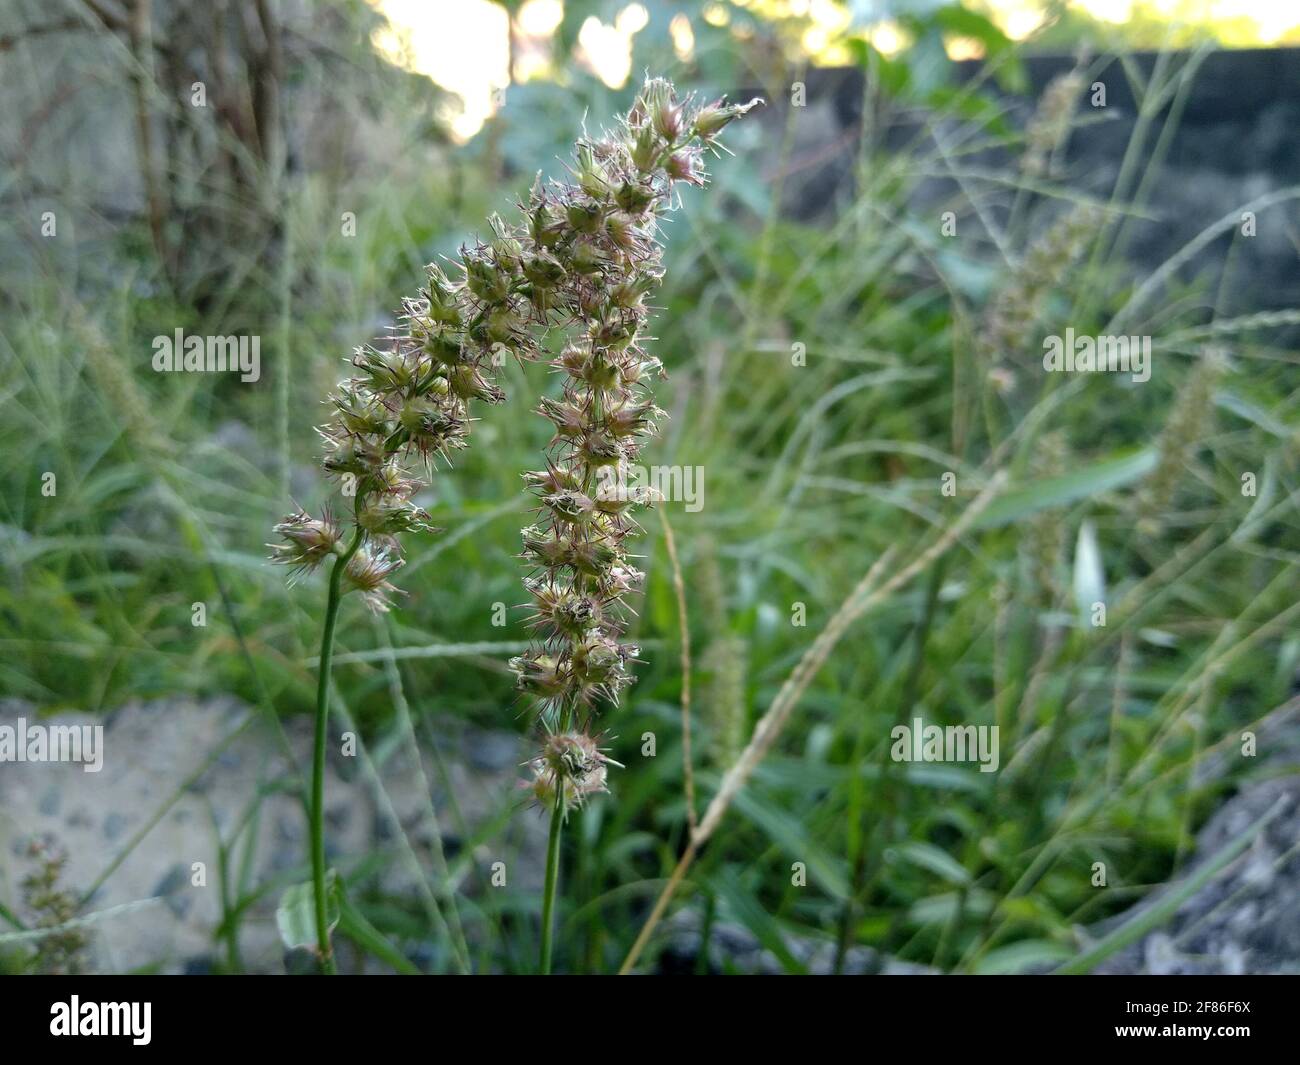 salvador, bahia, brazil - december 7, 2020: cenchrus echinatus plant popularly known as carrapicho, is seen in a garden in the city of Salvador. *** L Stock Photo